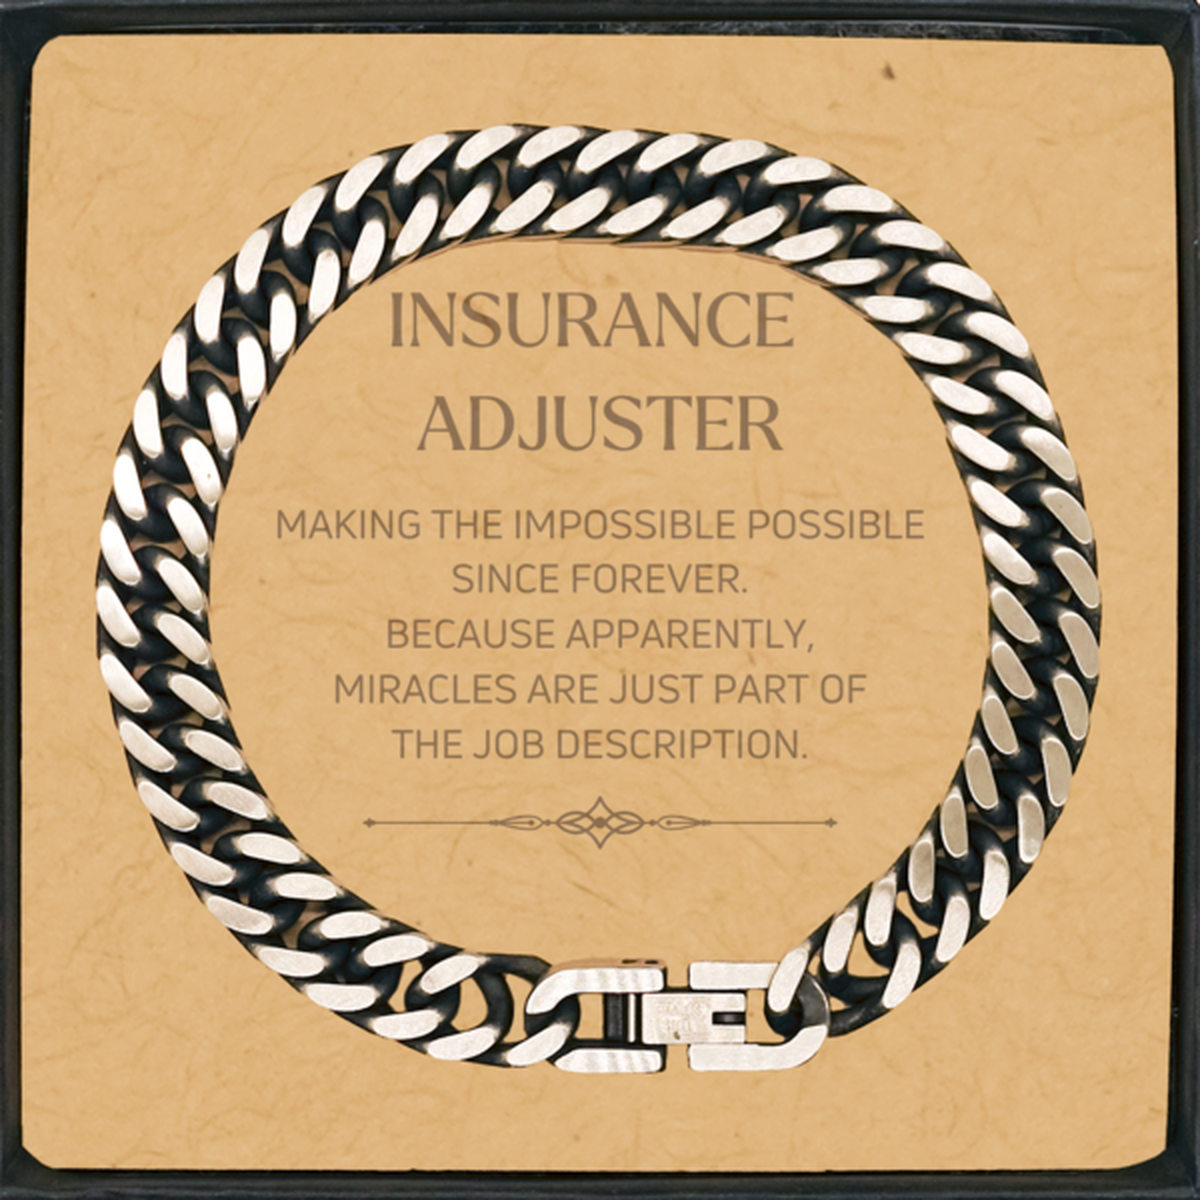 Funny Insurance Adjuster Gifts, Miracles are just part of the job description, Inspirational Birthday Cuban Link Chain Bracelet For Insurance Adjuster, Men, Women, Coworkers, Friends, Boss